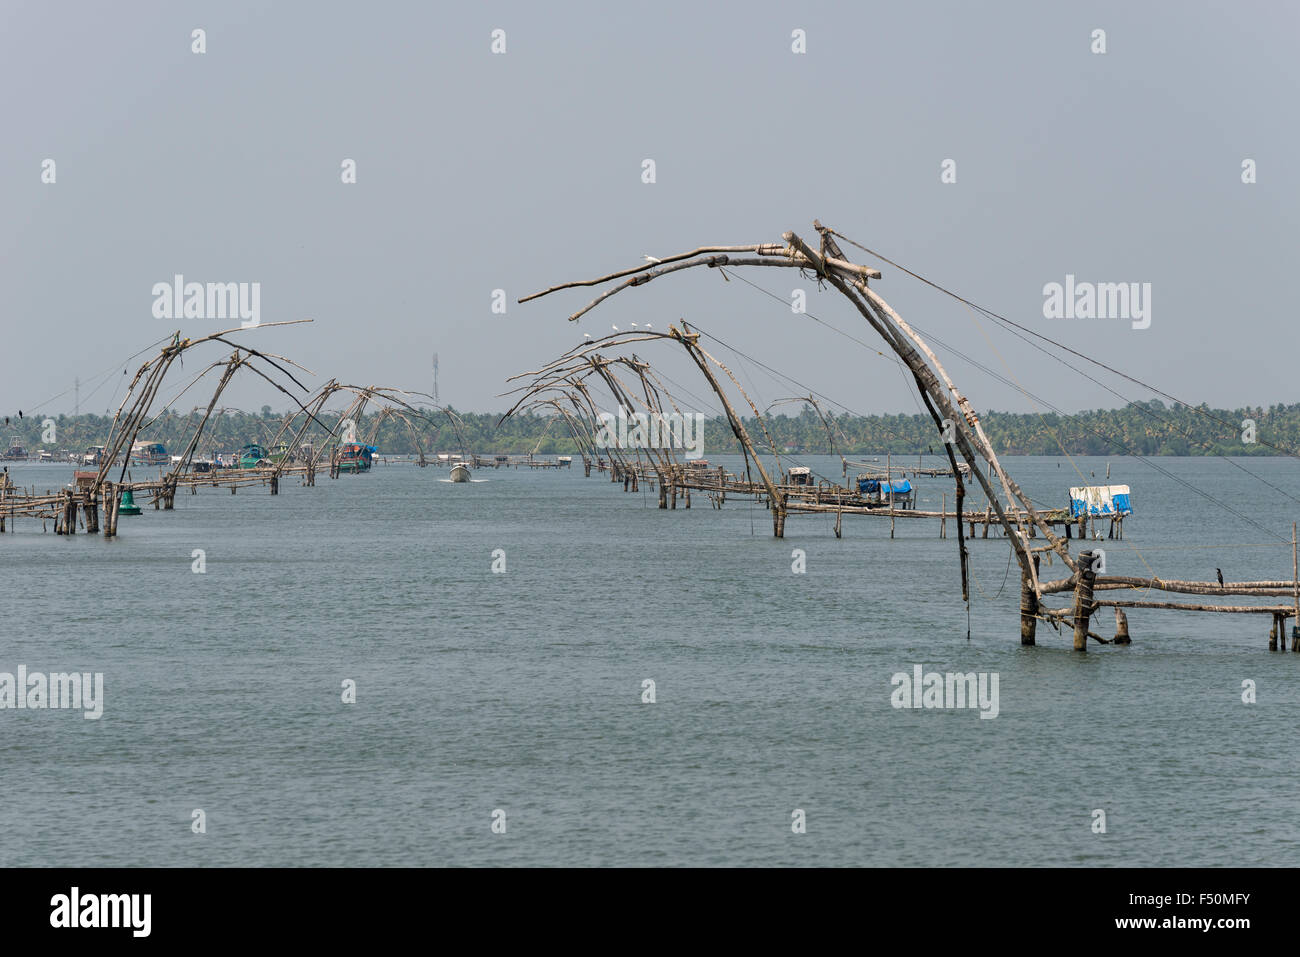 https://c8.alamy.com/comp/F50MFY/a-long-line-of-chinese-fishing-nets-is-set-up-along-a-canal-in-keralas-F50MFY.jpg